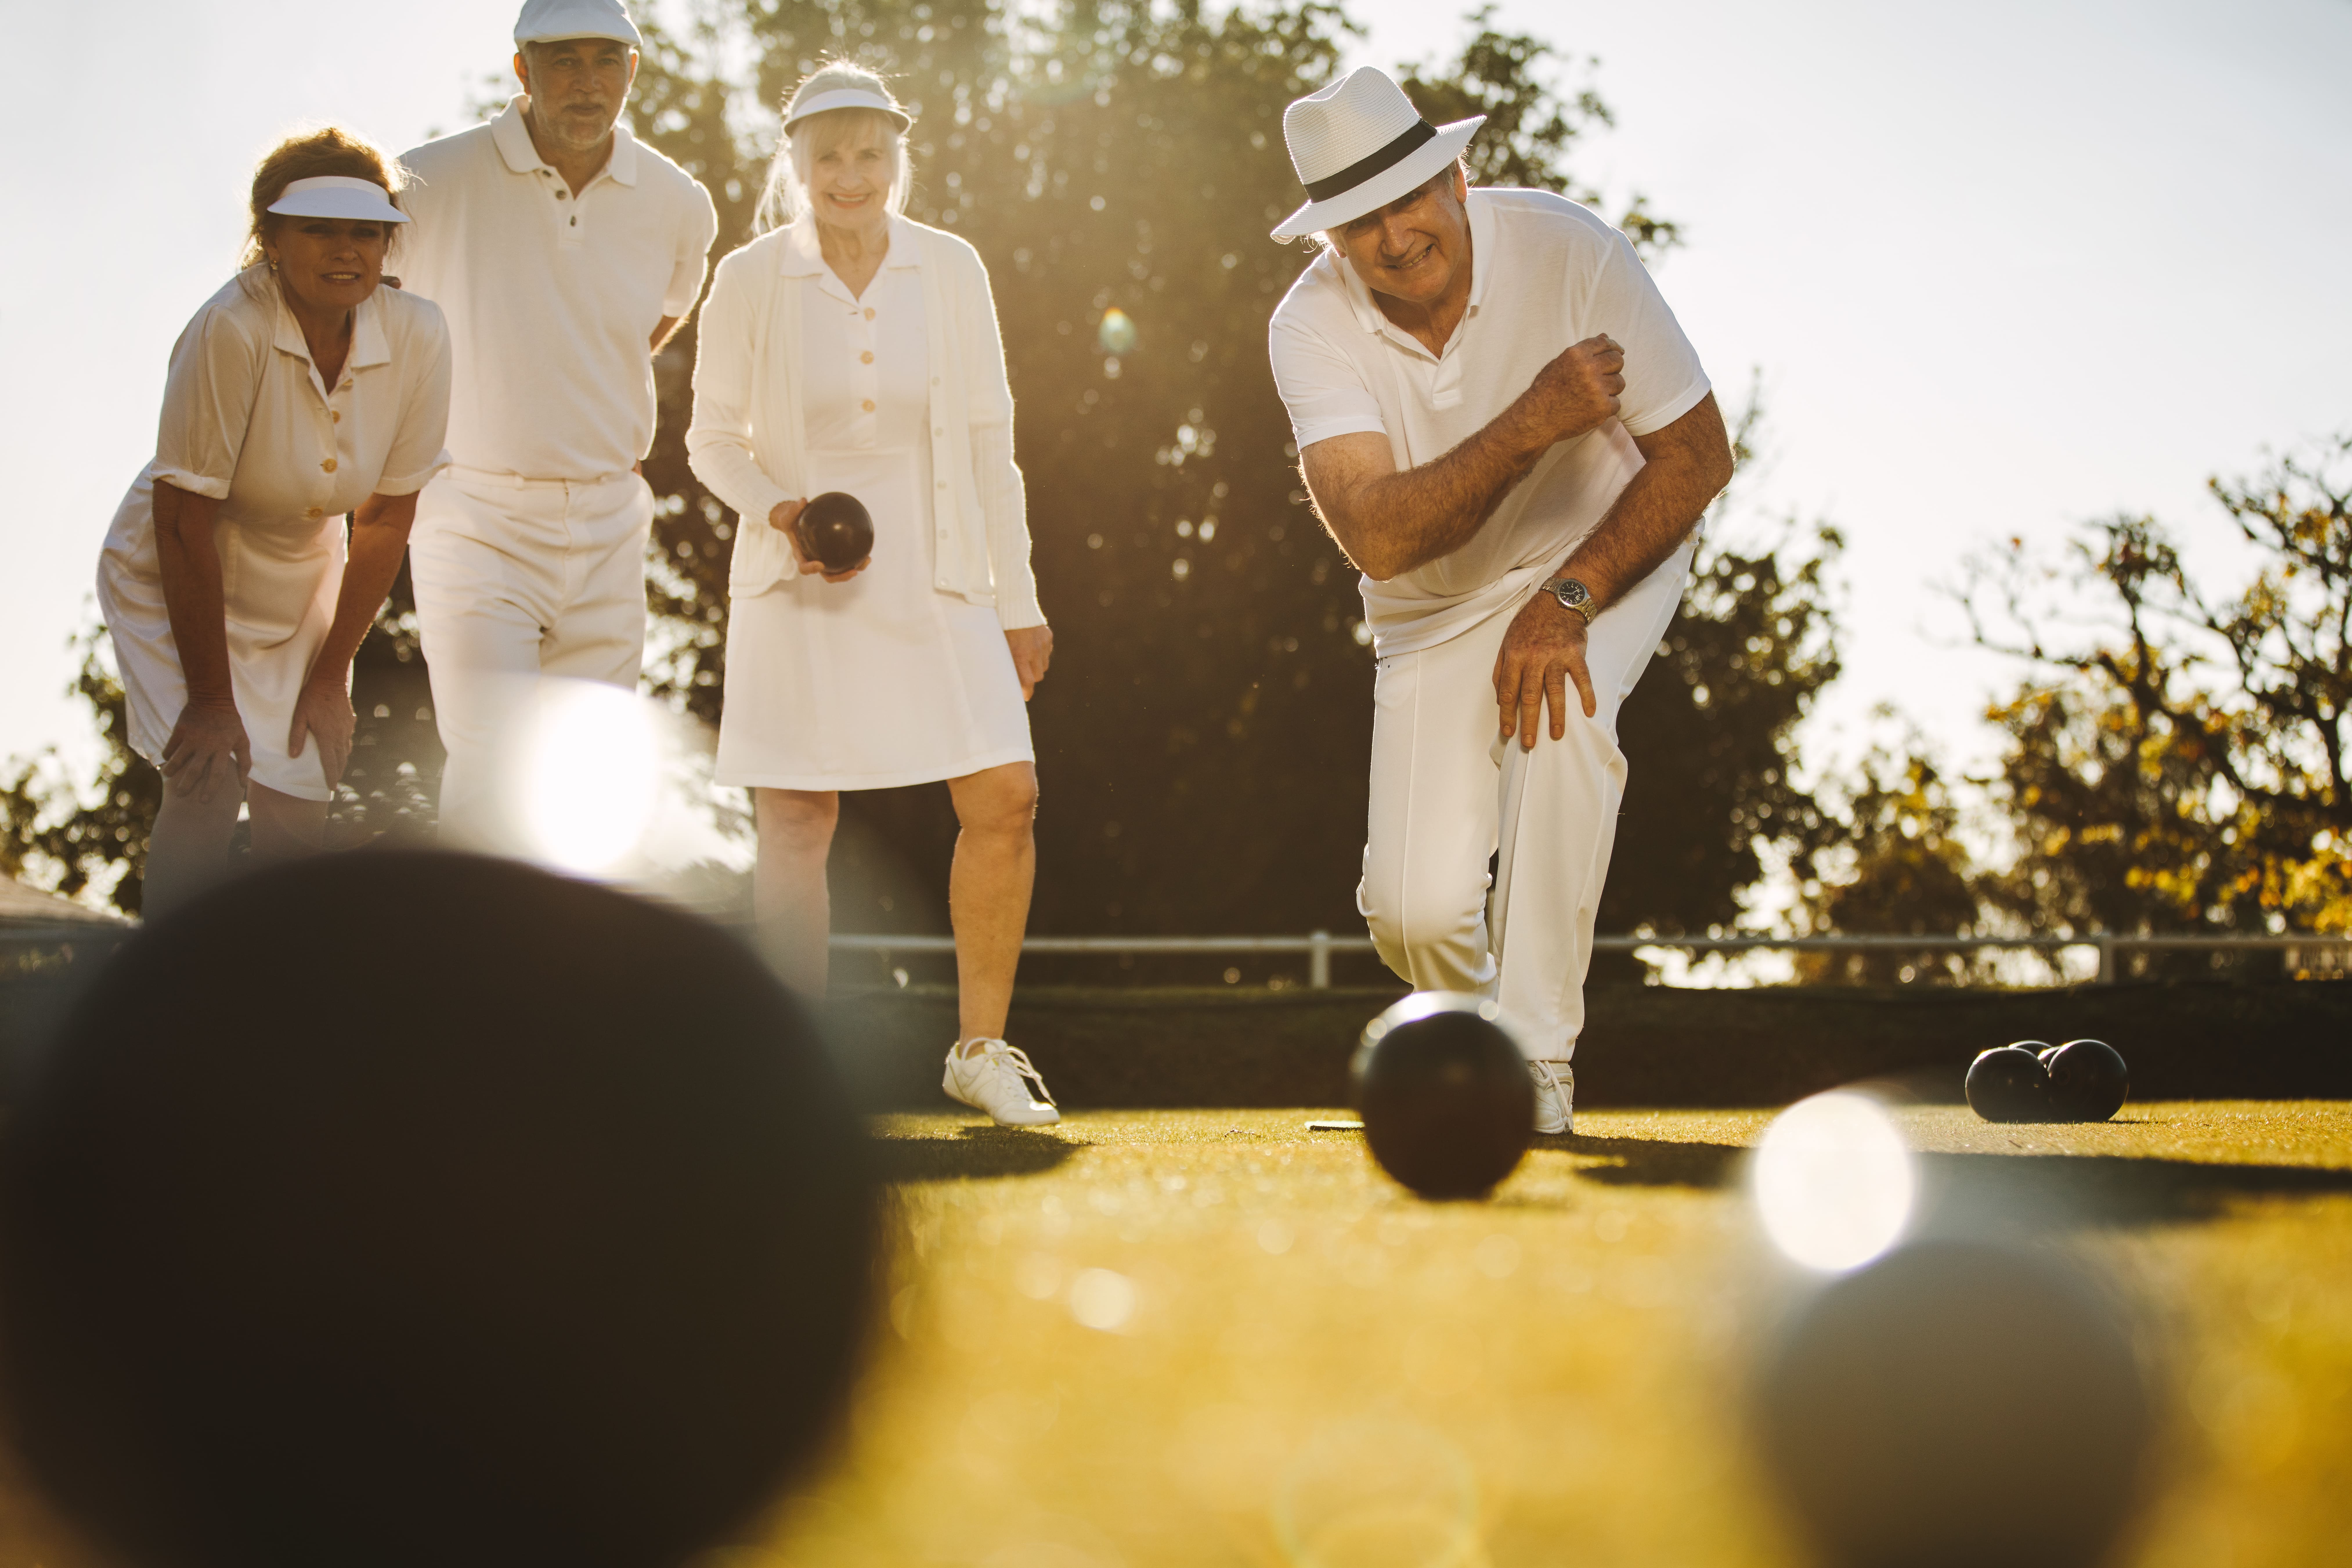 What can I do to ease my lower back pain when playing bowls or tenpin bowling?